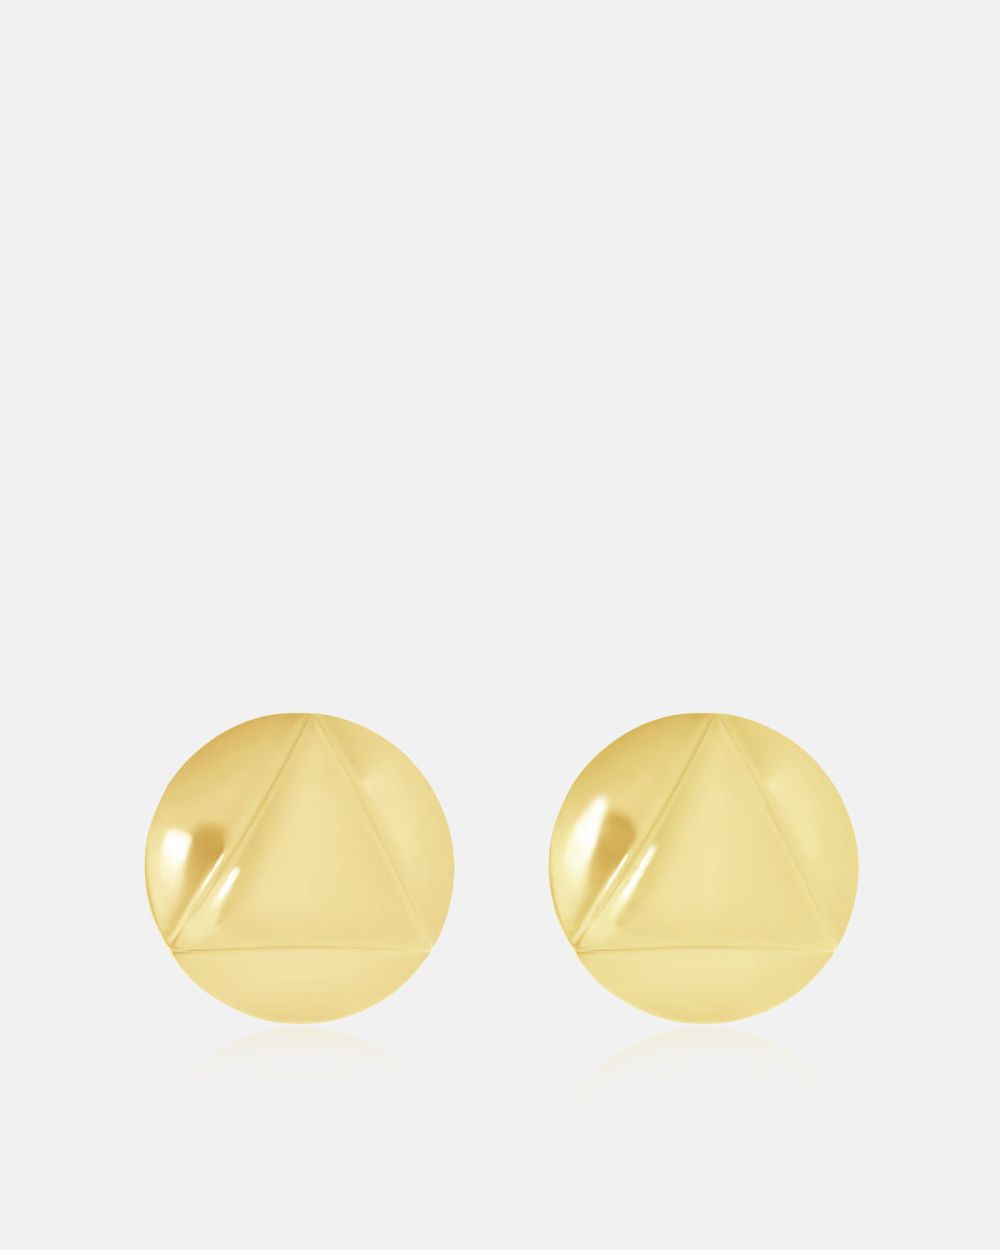 Edges Earrings in Gold Plated Silver